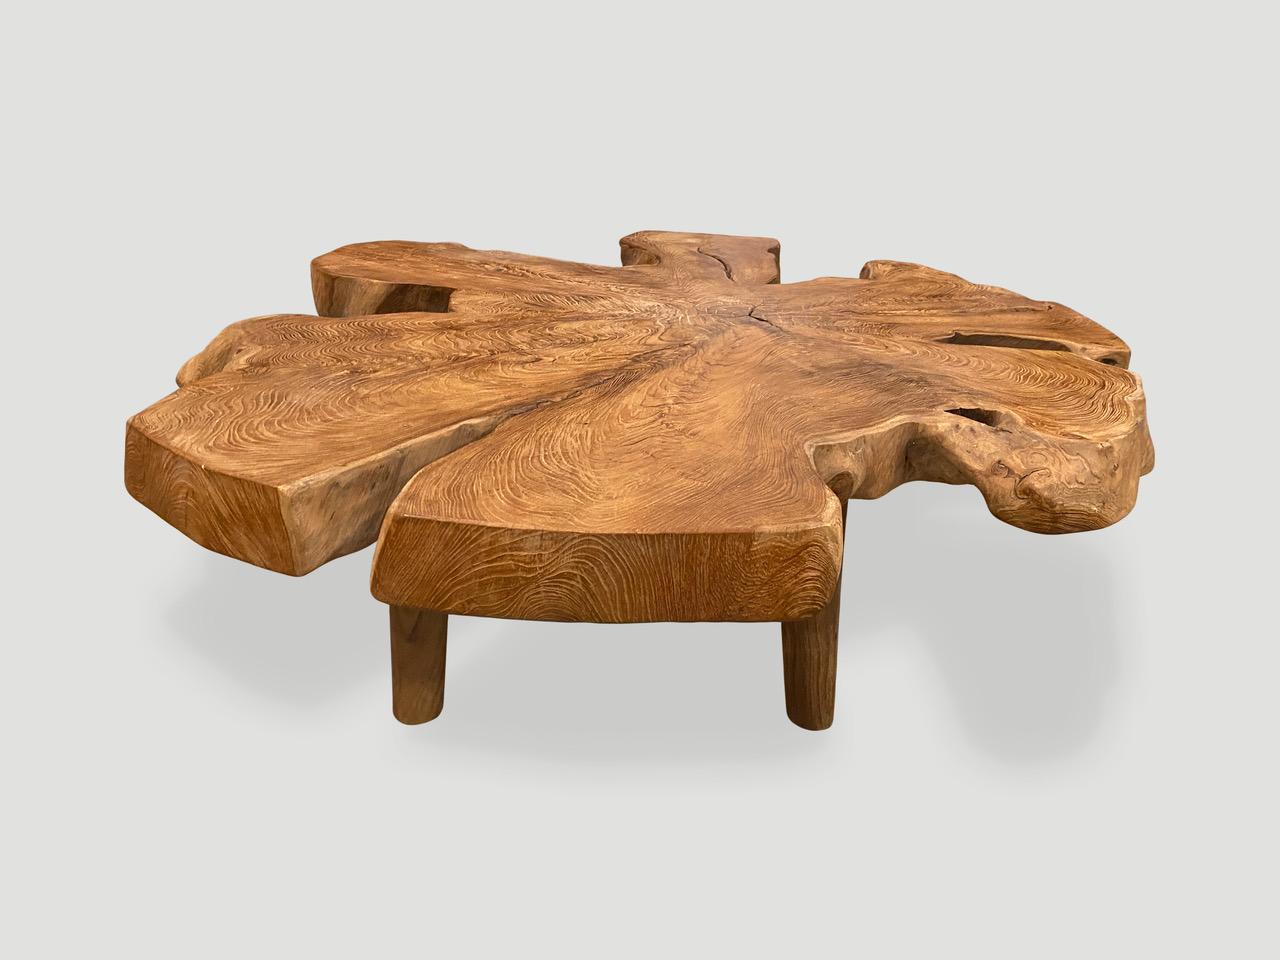 Impressive three inch reclaimed teak wood coffee table. Floating on minimalist cylinder legs with a natural oil finish revealing the beautiful wood grain. Organic with a twist. 

Own an Andrianna Shamaris original.

Andrianna Shamaris. The